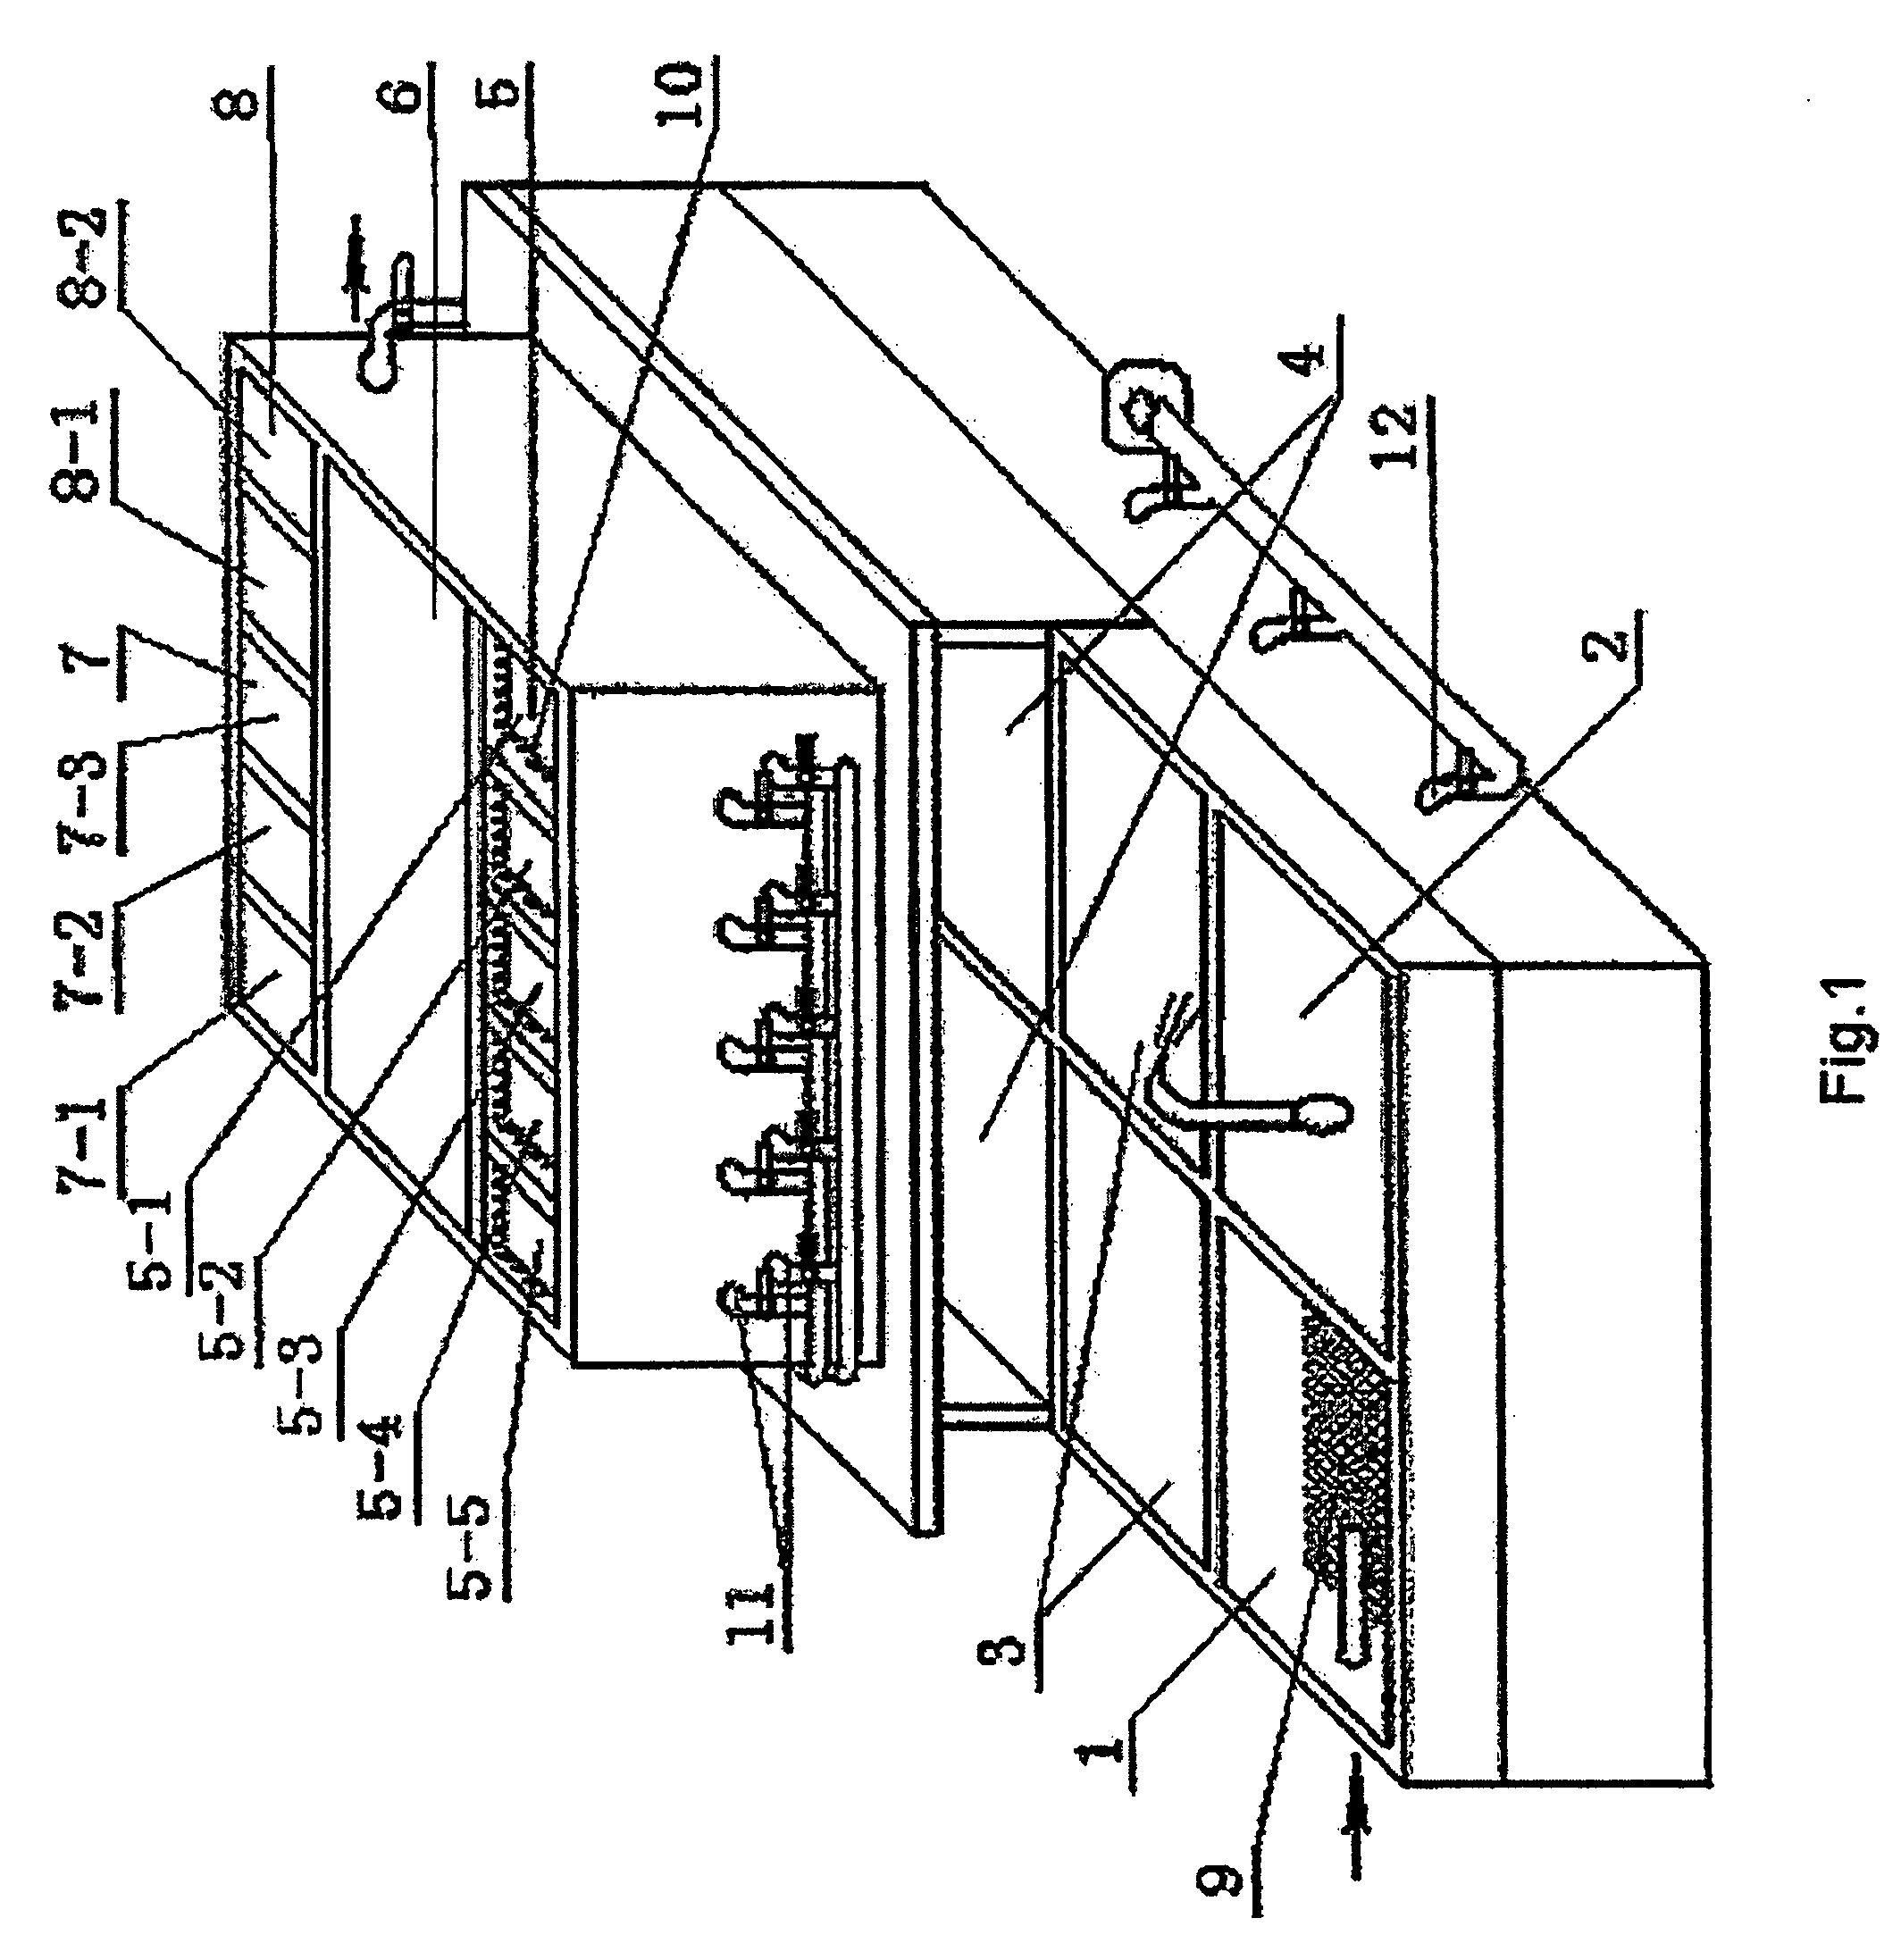 Device for deep sewage treatment without sludge discharge